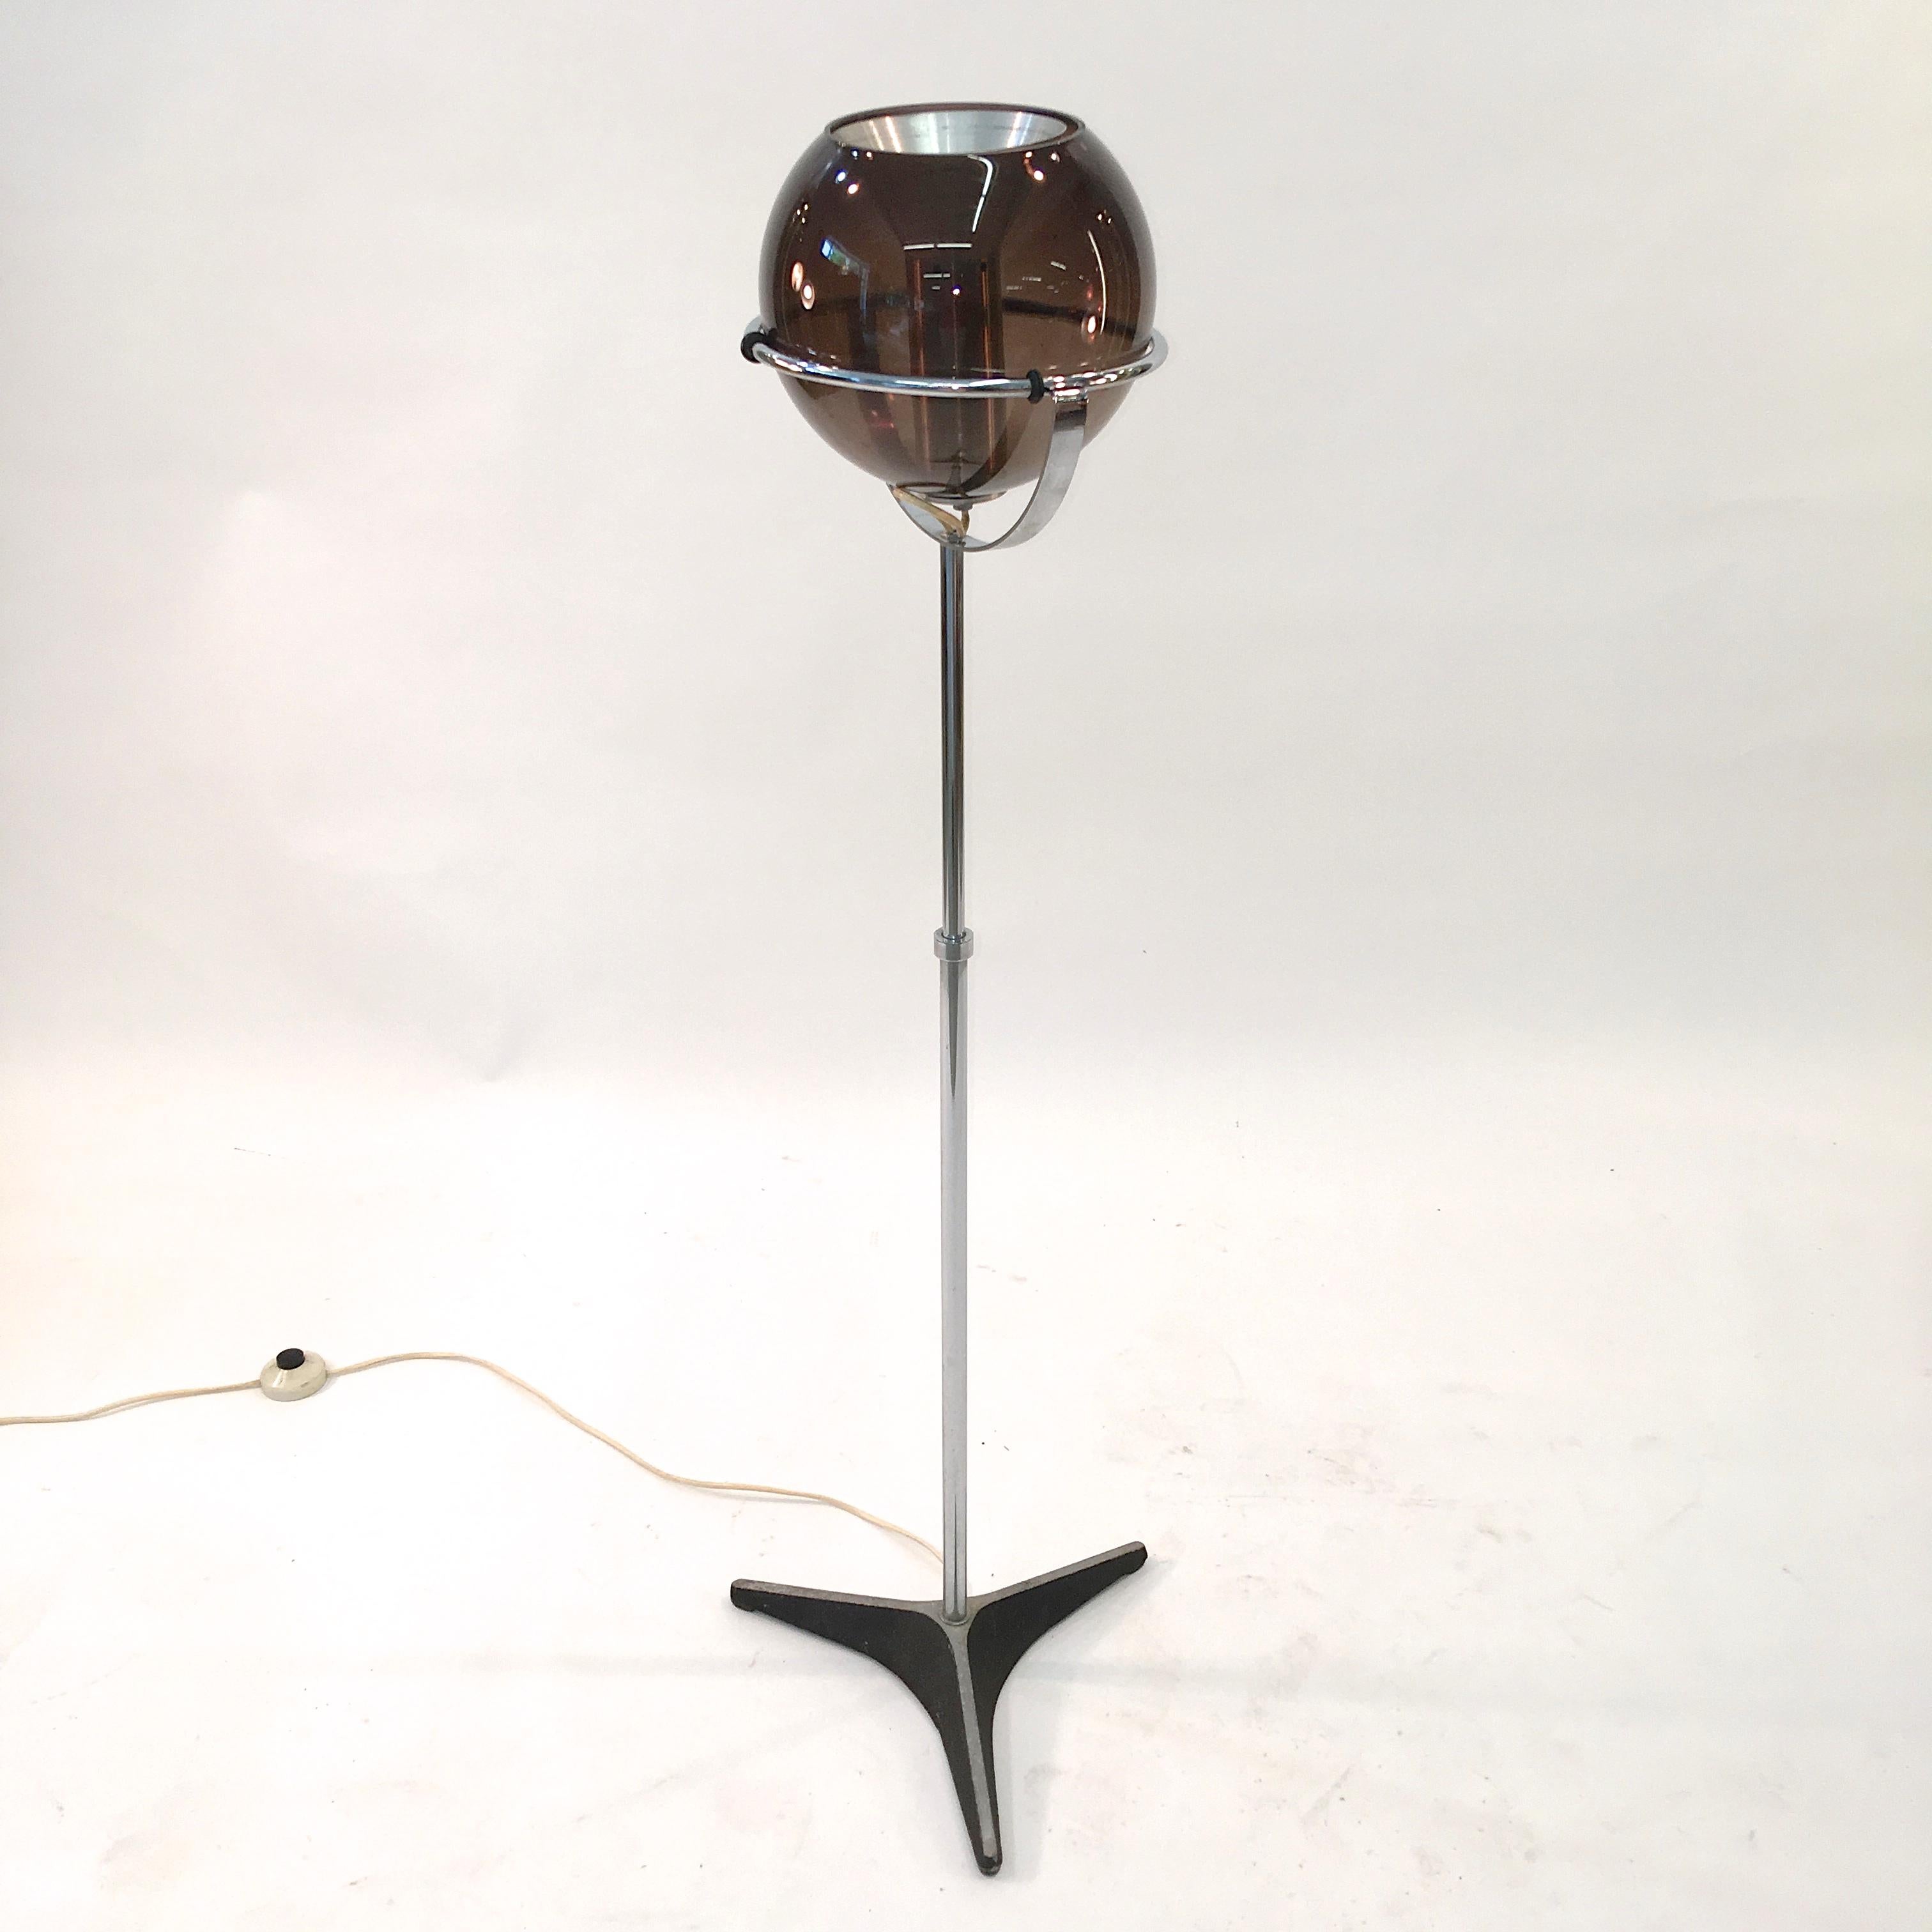 1960s smoked glass globe with an internal spun aluminum cone reflector, supported by a chrome structure on adjustable stem and black painted tri-star base.
This floor lamp is part of RAAK's highly successful 1960s Globe series by Frank